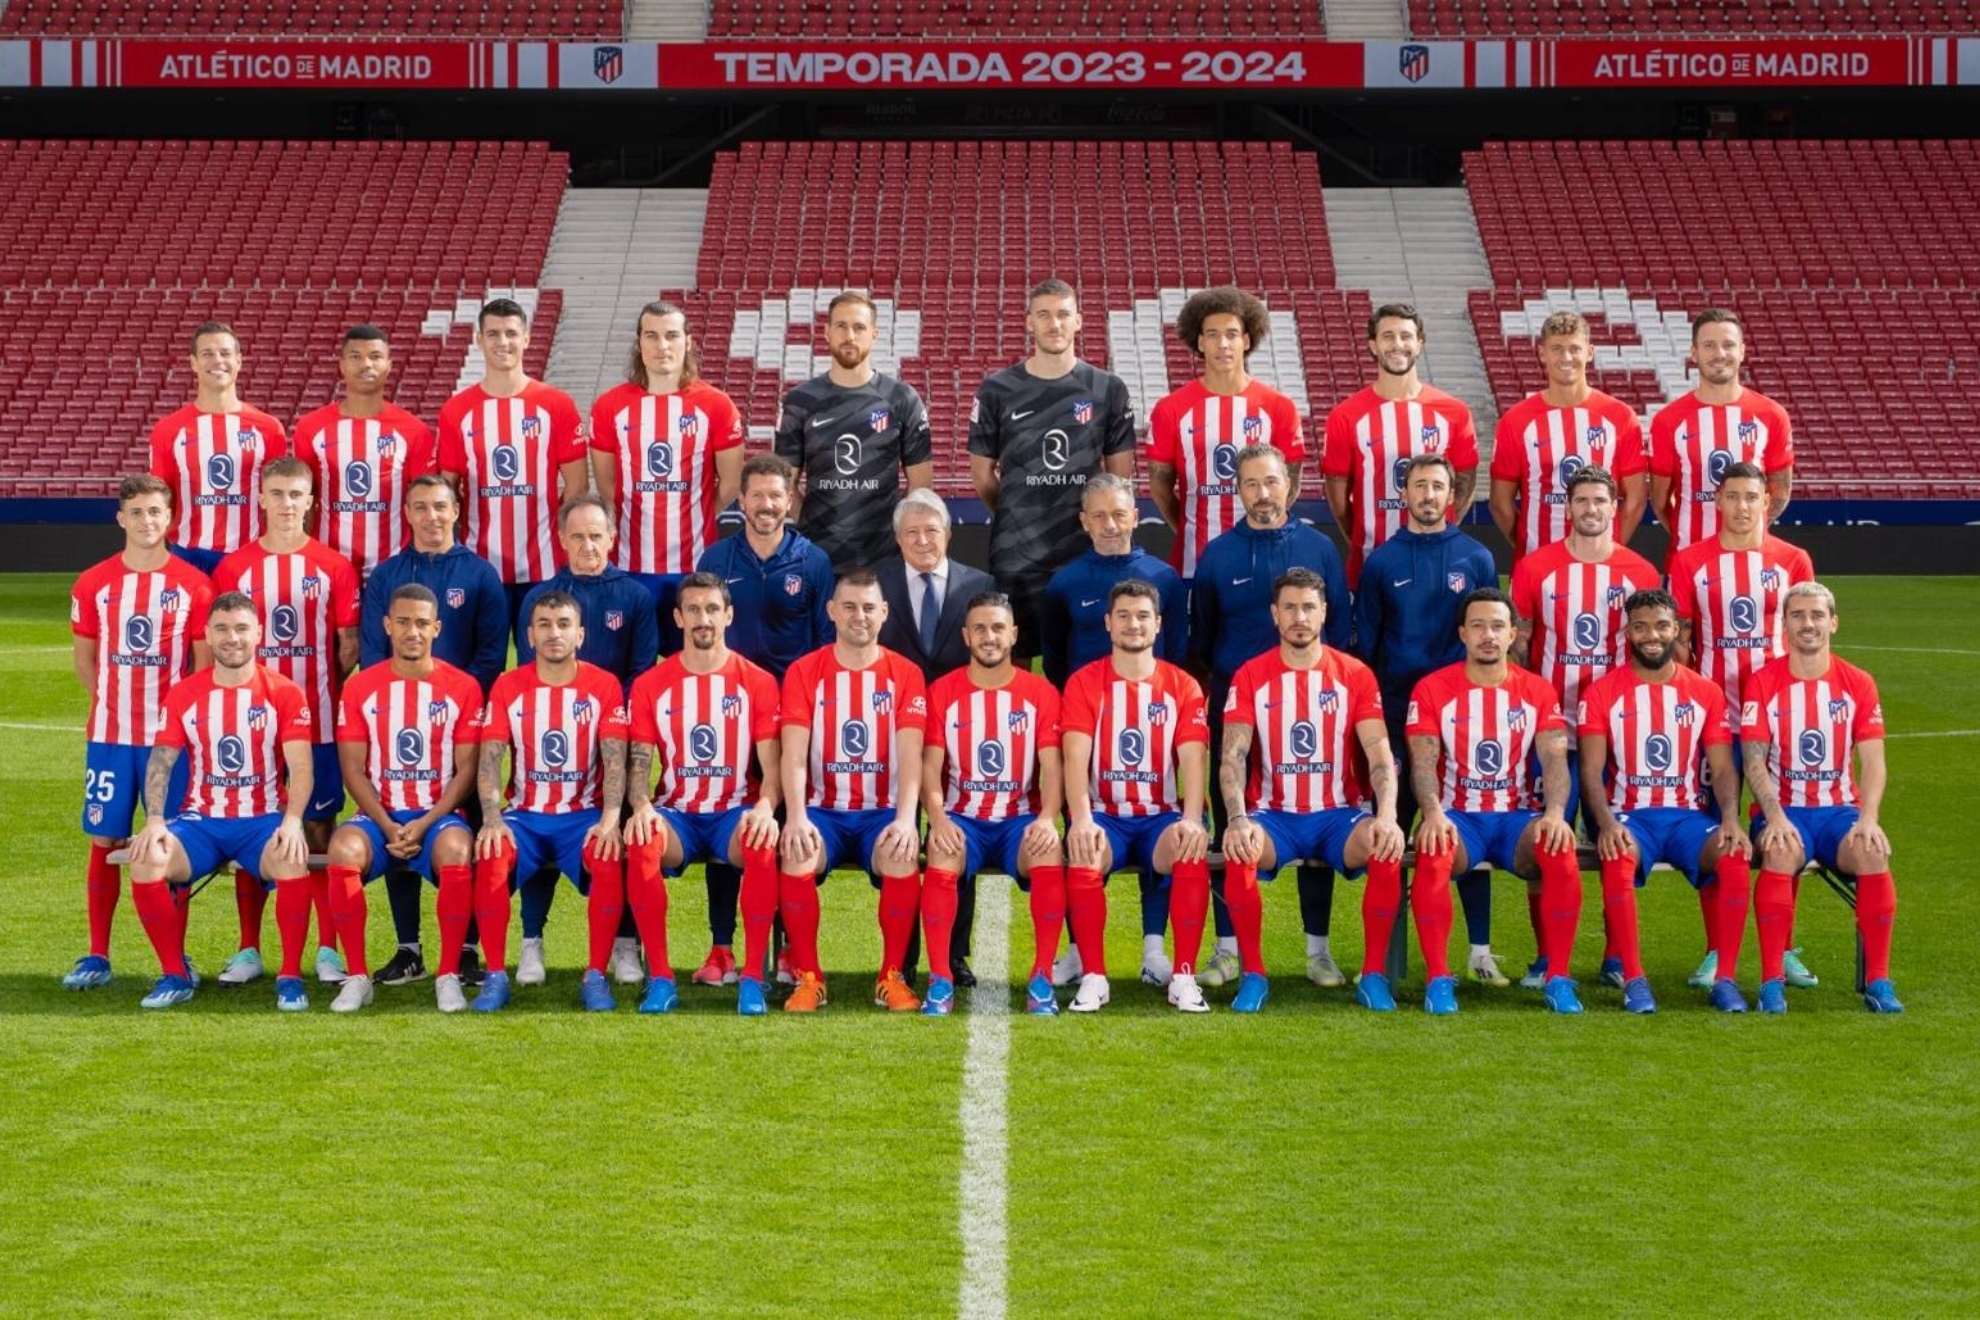 Two Atletico Madrid Fan Token holders 'sneak' into the official team picture